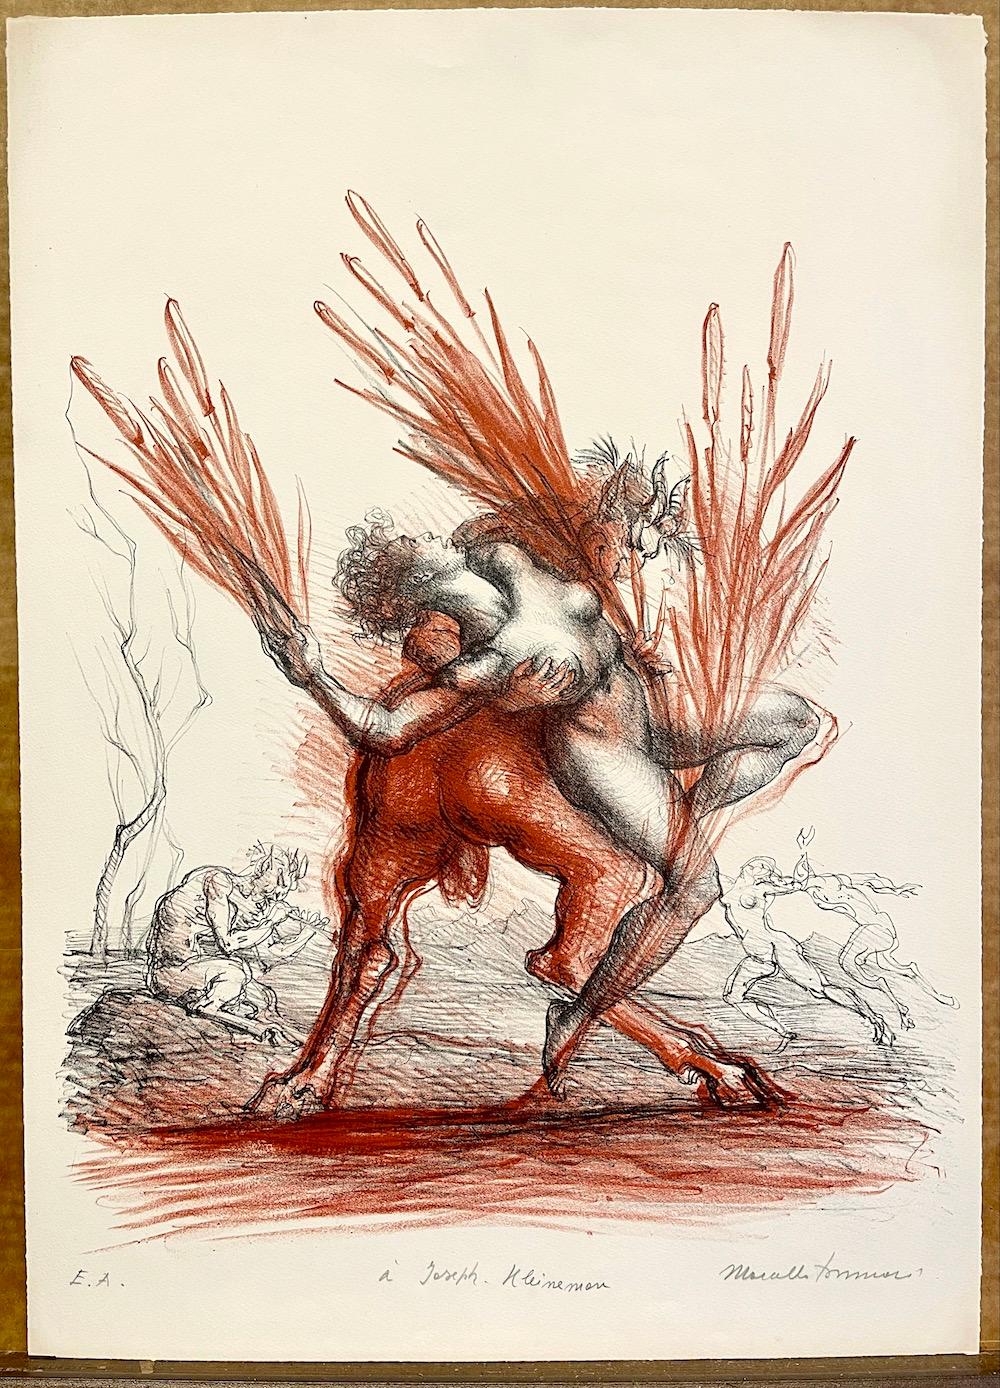 OVID METAMORPHOSES - Metamorfosi di Ovidio is an original hand drawn lithograph by the Italian artist sculptor Marcello Tommasi (1928-2008). Printed by hand in black and deep red brown color ink on archival printmaking paper using traditional hand